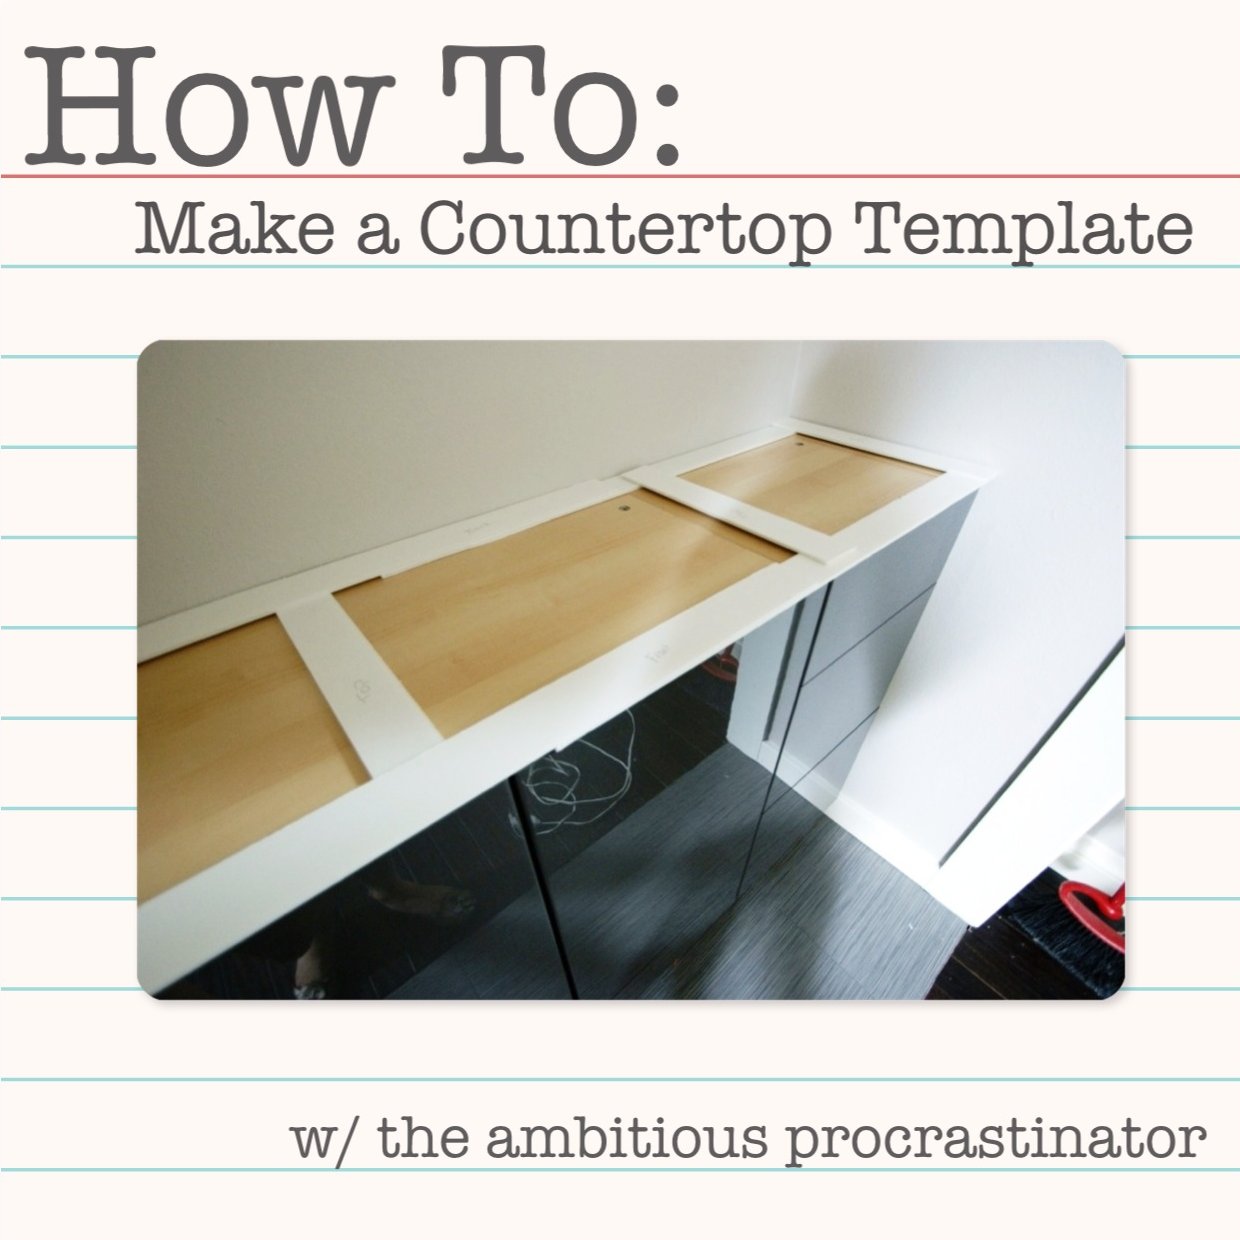 the-ambitious-procrastinator-how-to-make-a-countertop-template